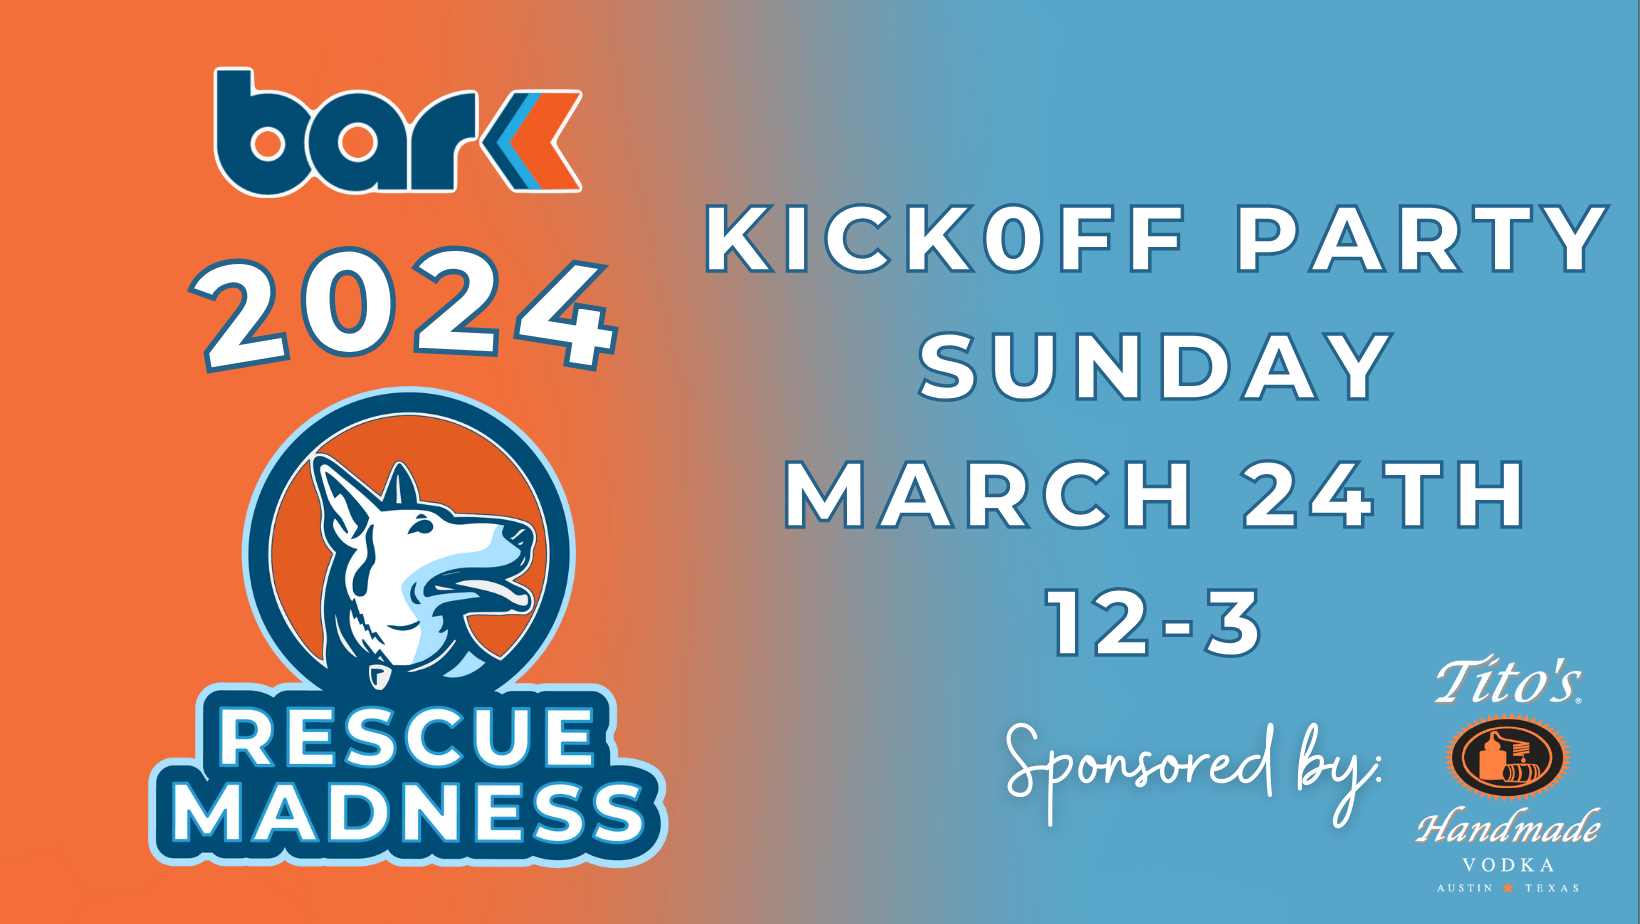 Bar K 2024 Rescue Madness hosts kickoff party Sunday March 24th from 12 to 3 pm